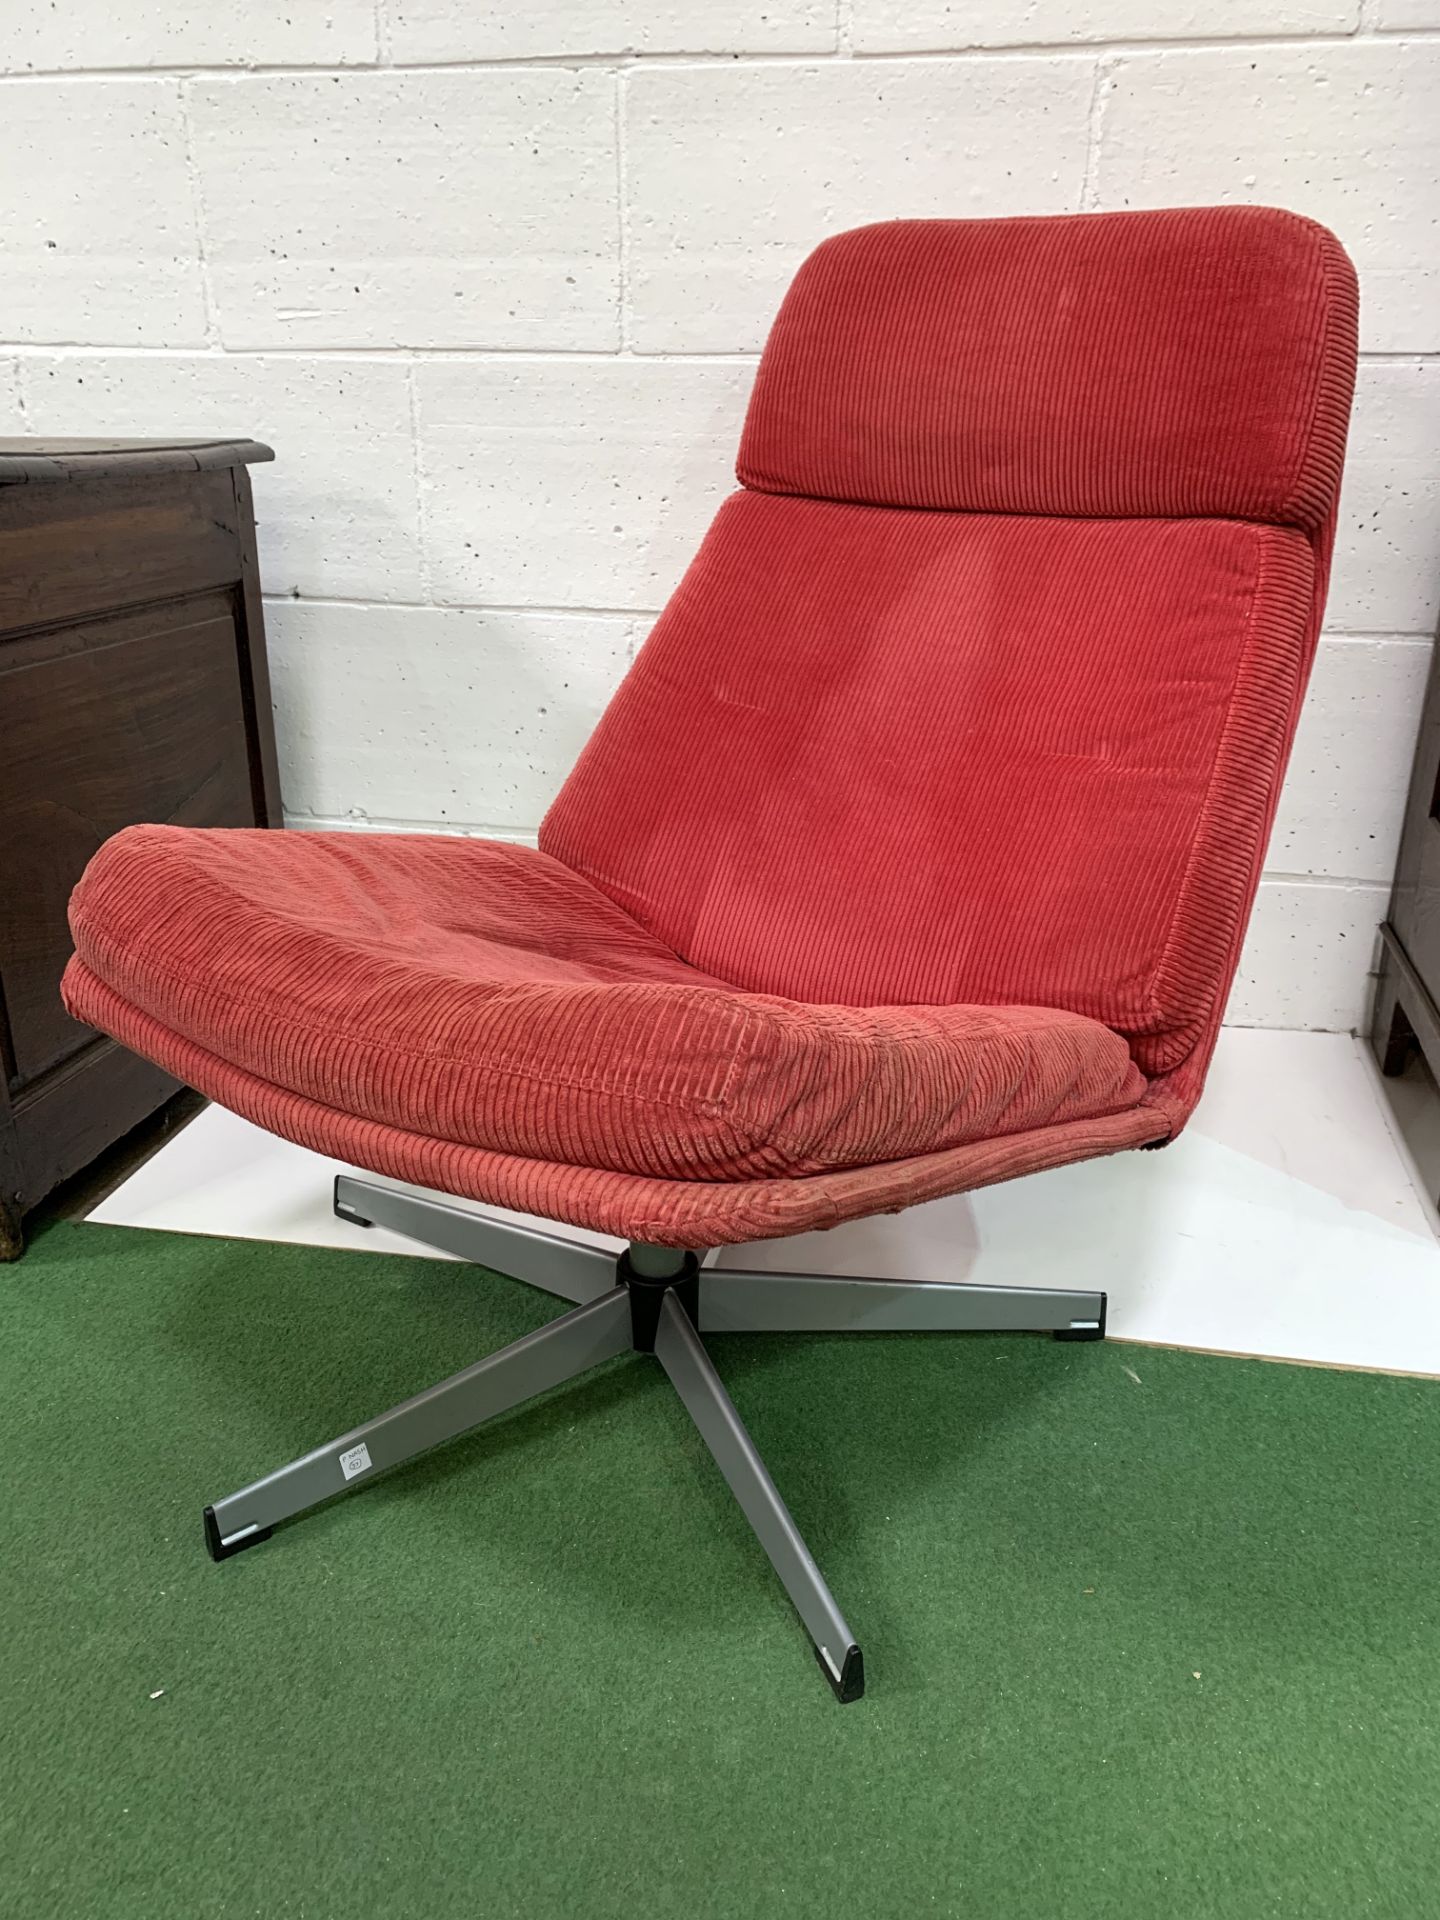 Low swivel lounge chair upholstered in red cord. - Image 2 of 2